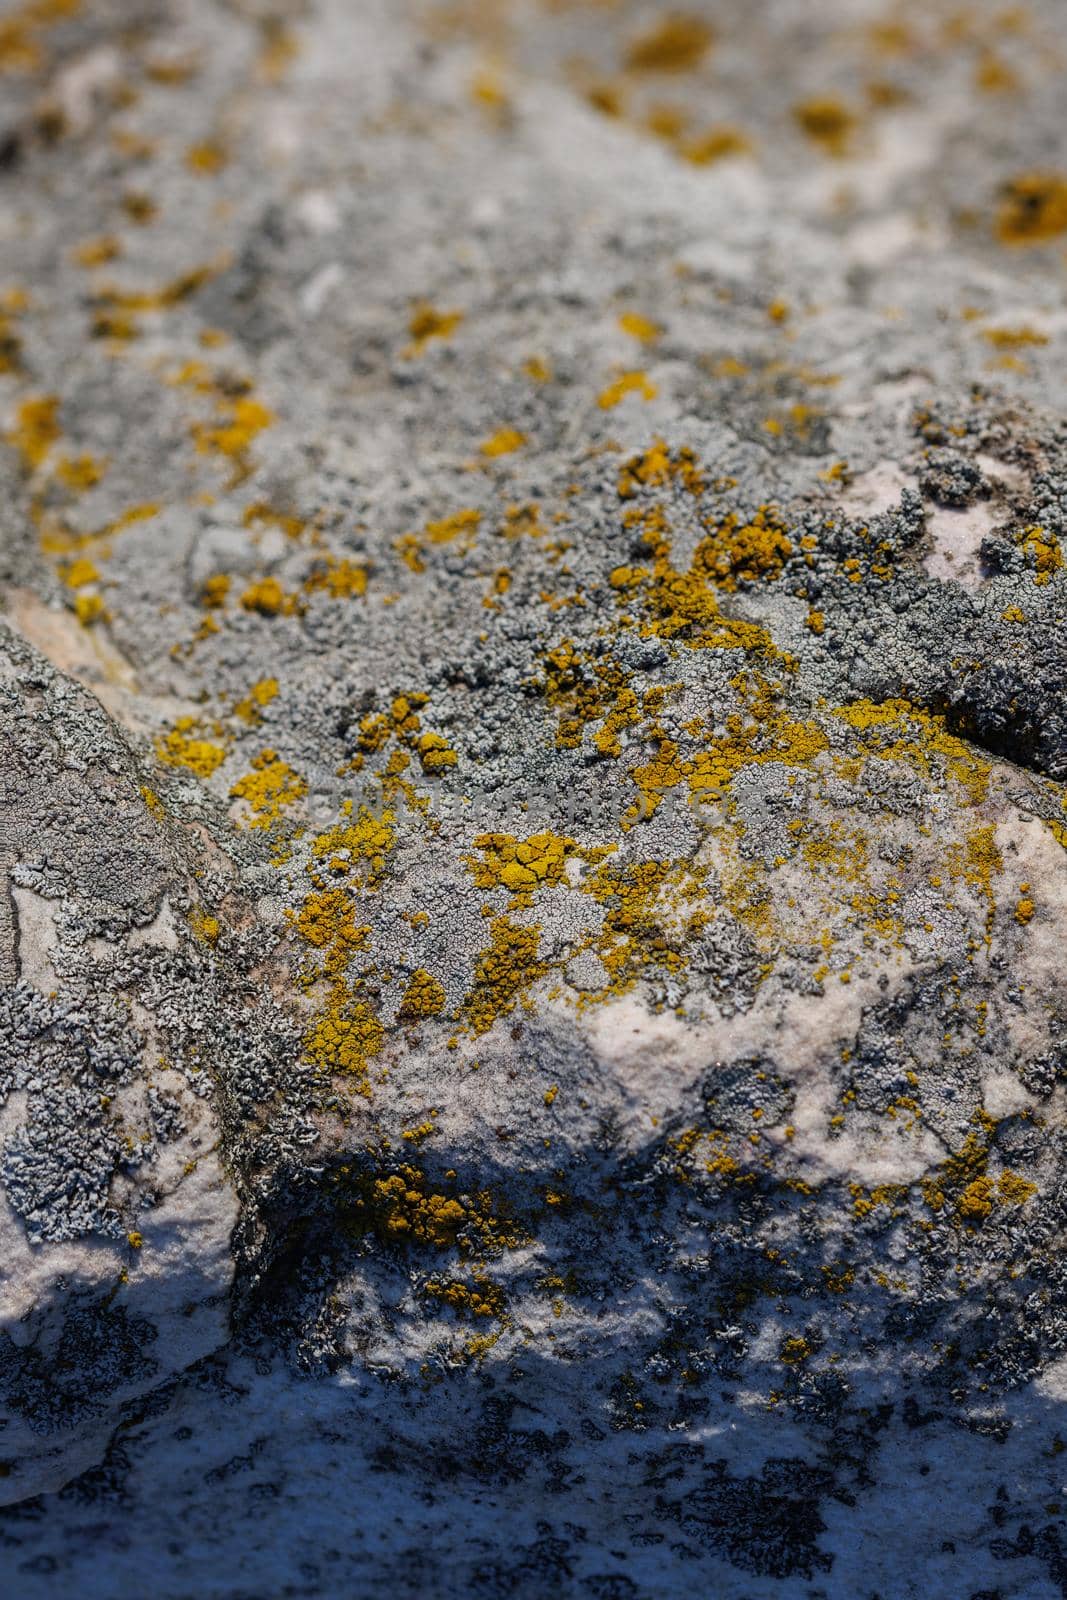 lichen presumably on quartzite sandstone surface under direct sunlight - full-frame texture and background by z1b